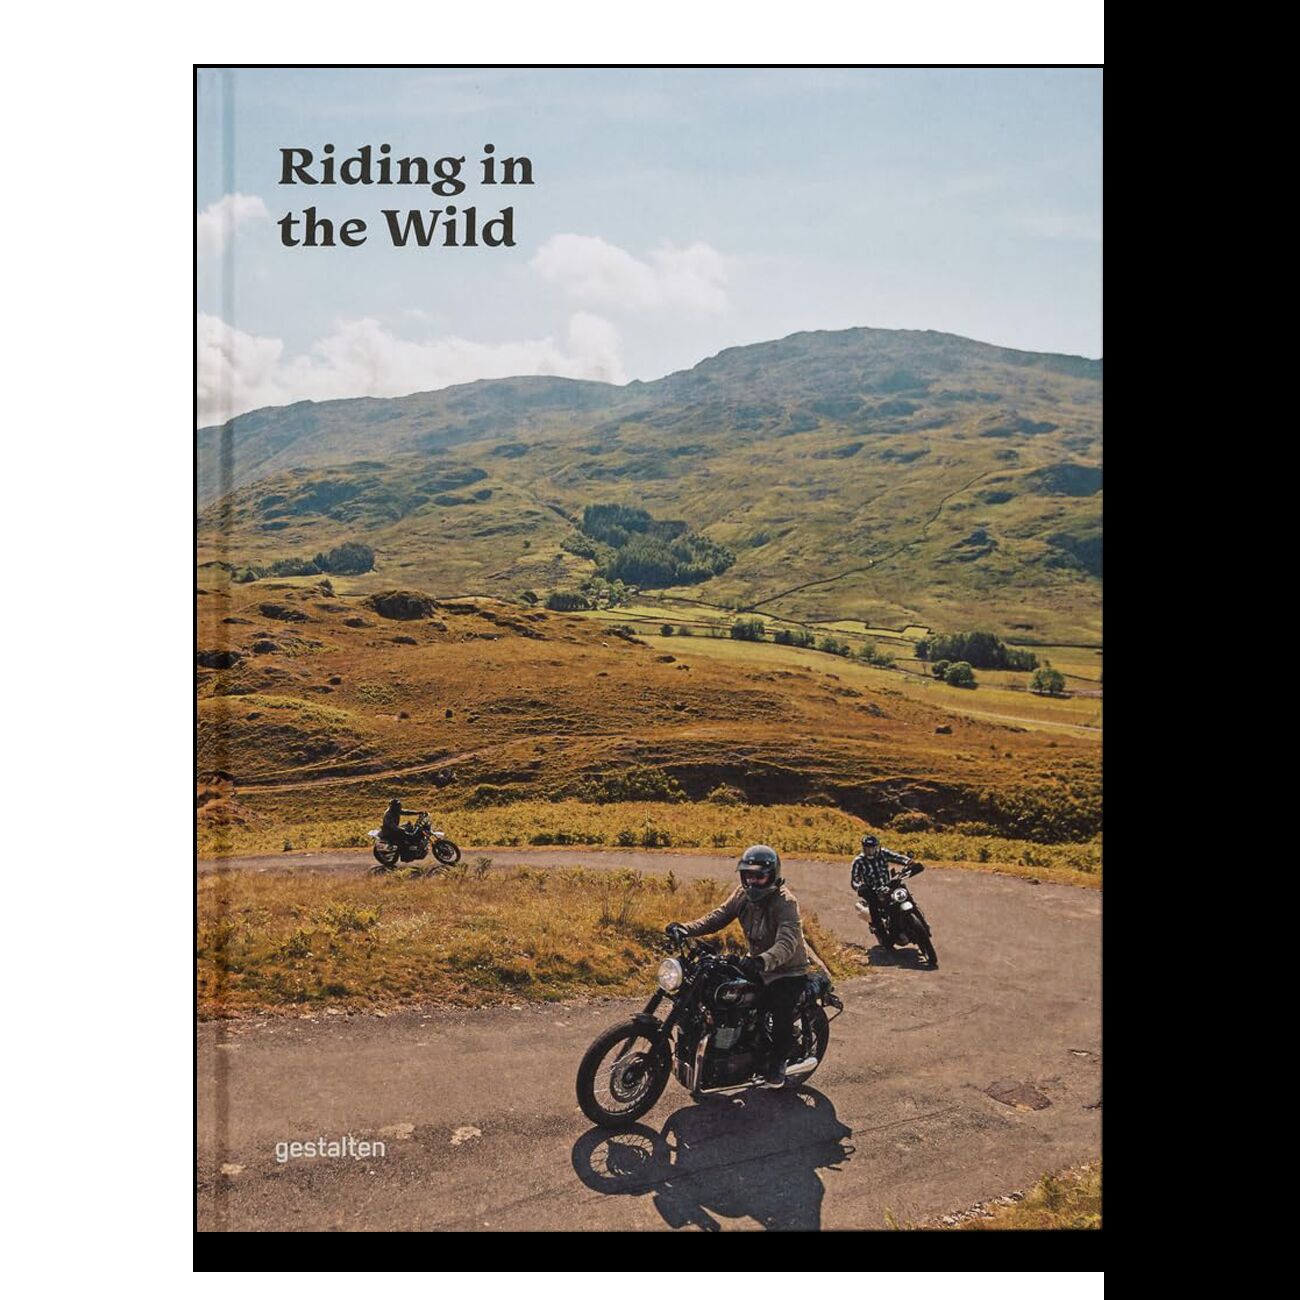 Riding in the Wild: Motorcycle adventures off and on the roads